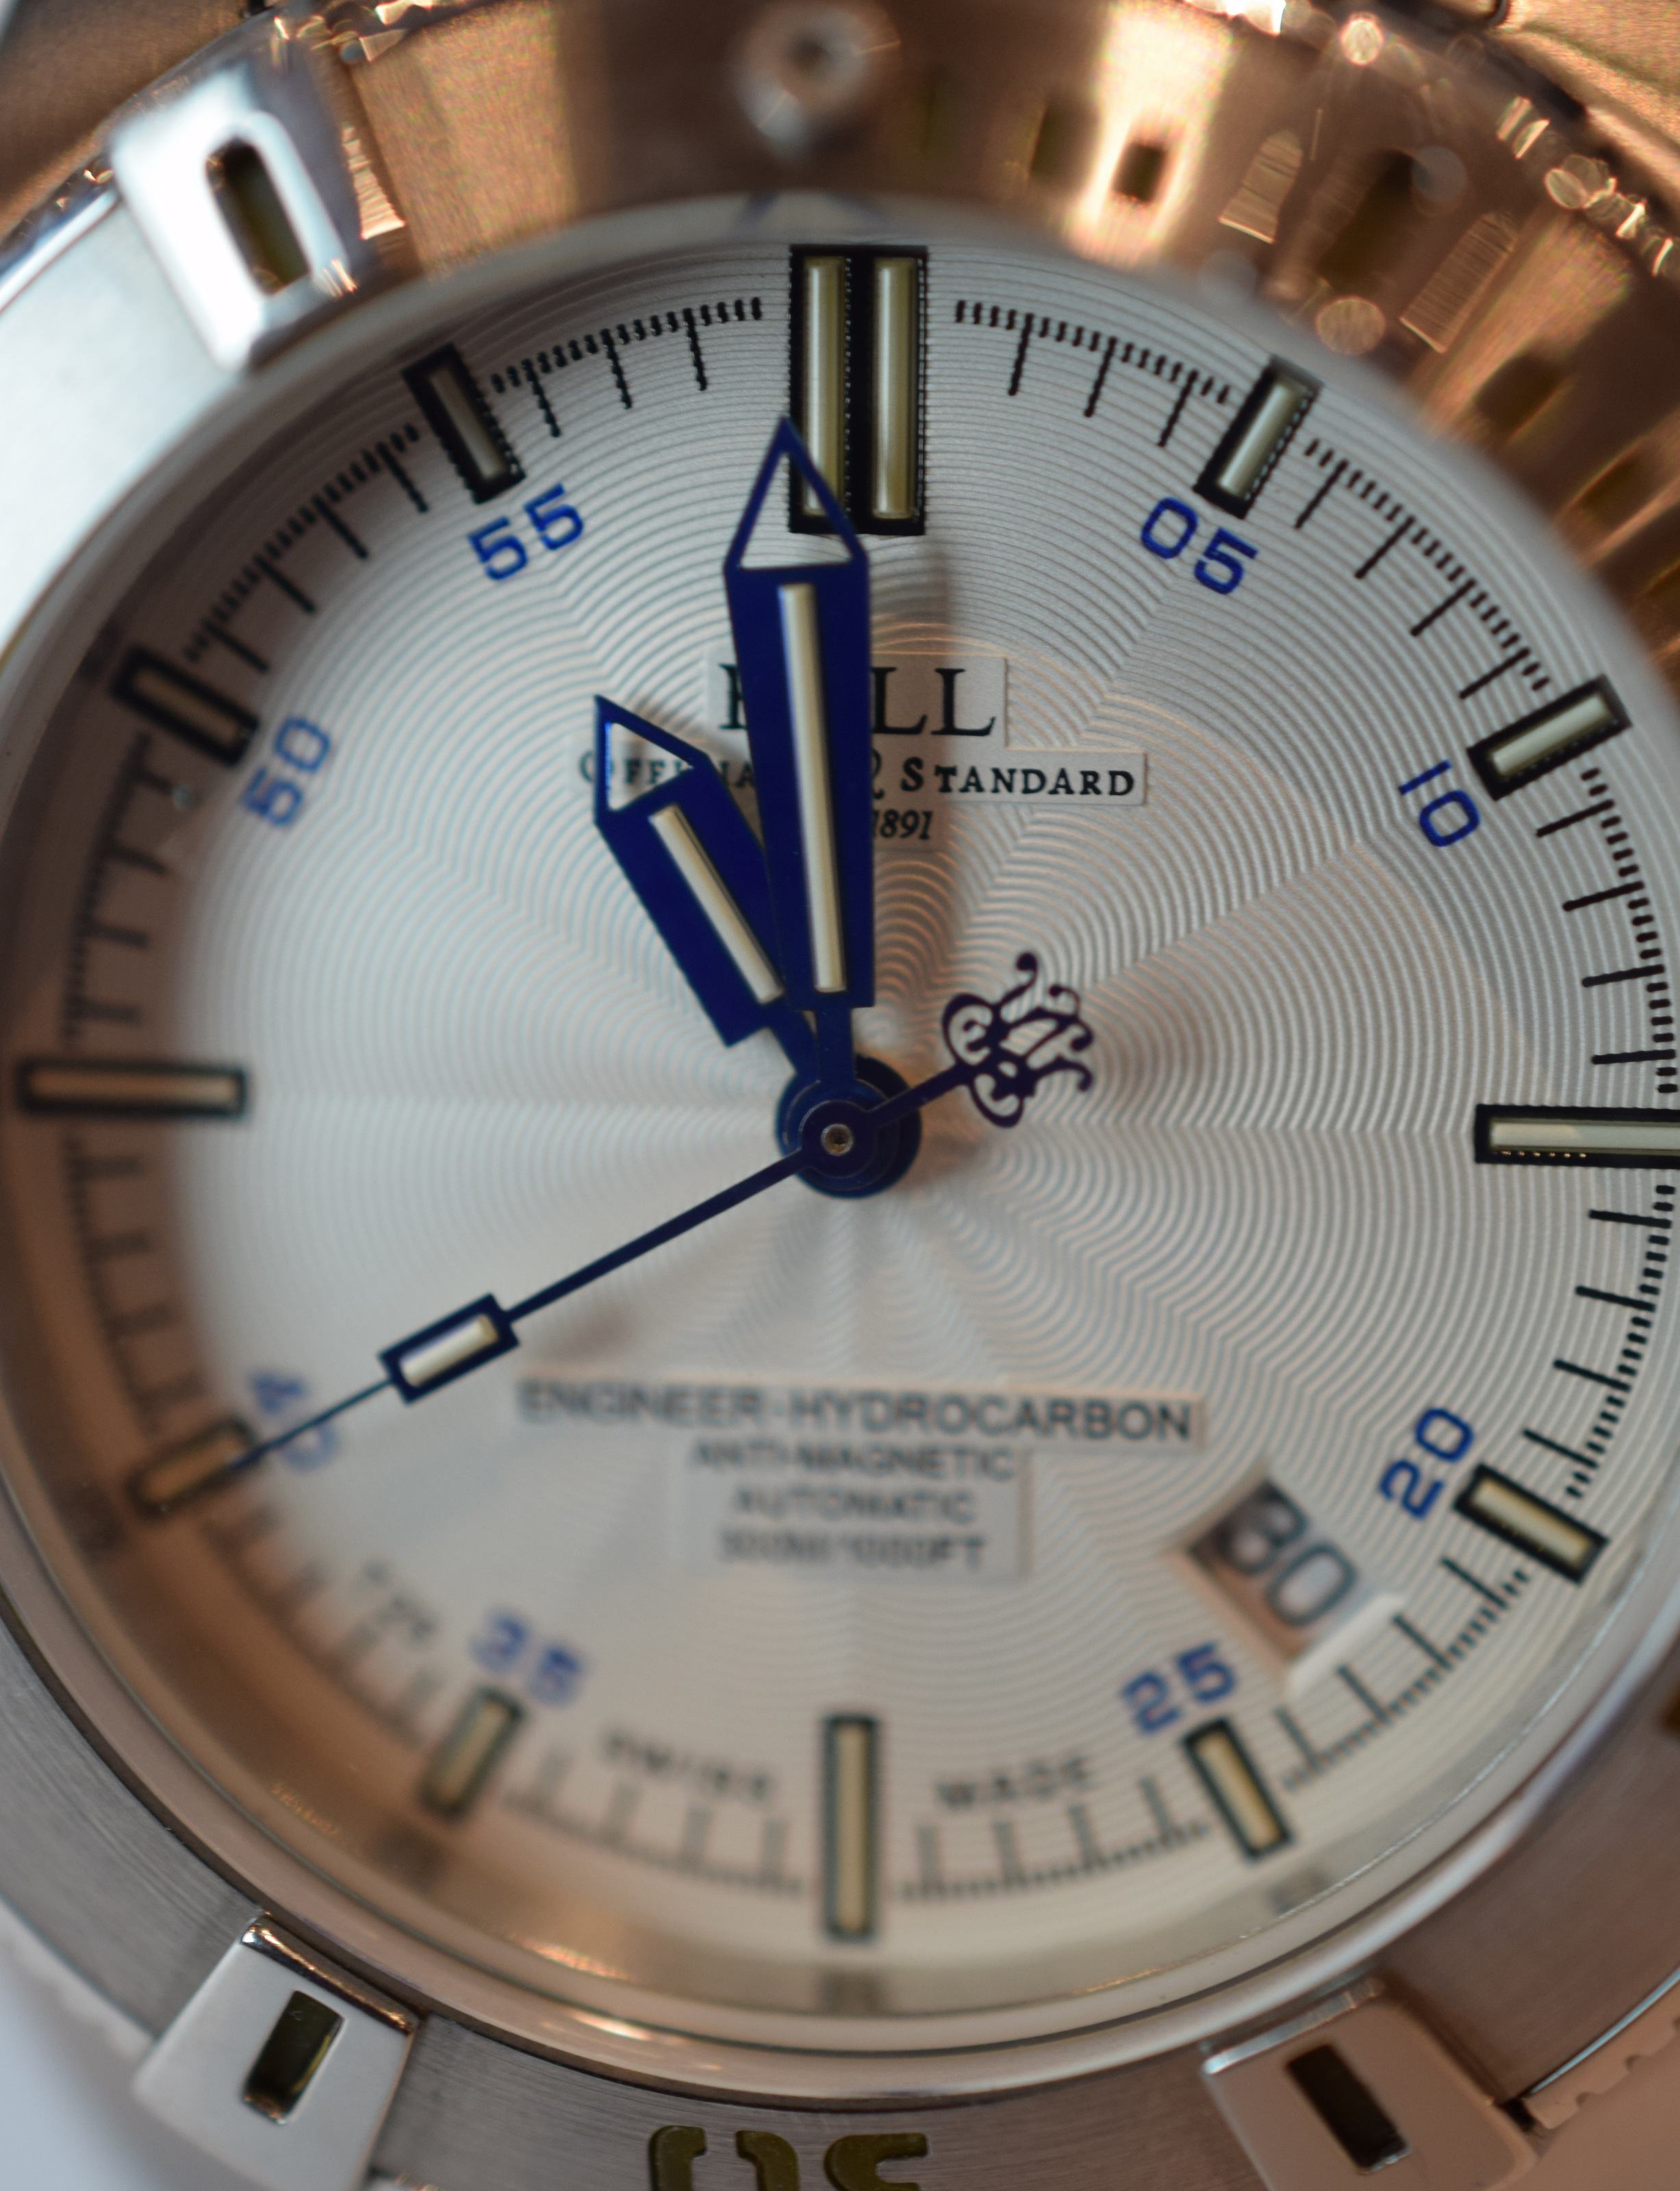 Ball Engineer-Hydrocarbon Classic III Wristwatch - Image 2 of 6